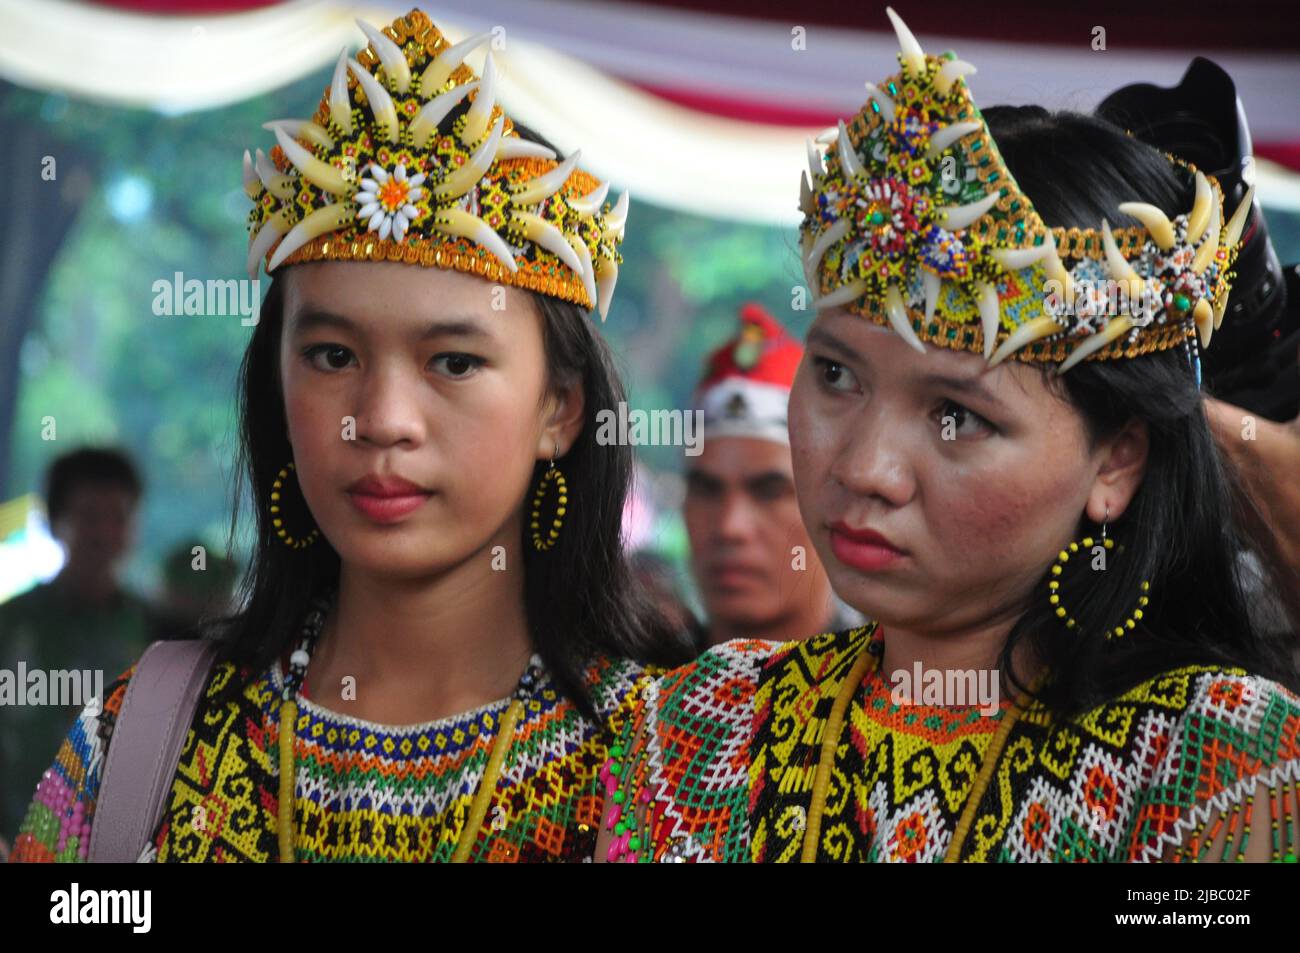 Jakarta, Indonesia - April 28, 2013 : Dayak women from Borneo, Kalimantan, wear traditional clothes at the Dayak festival in Jakarta, Indonesia Stock Photo